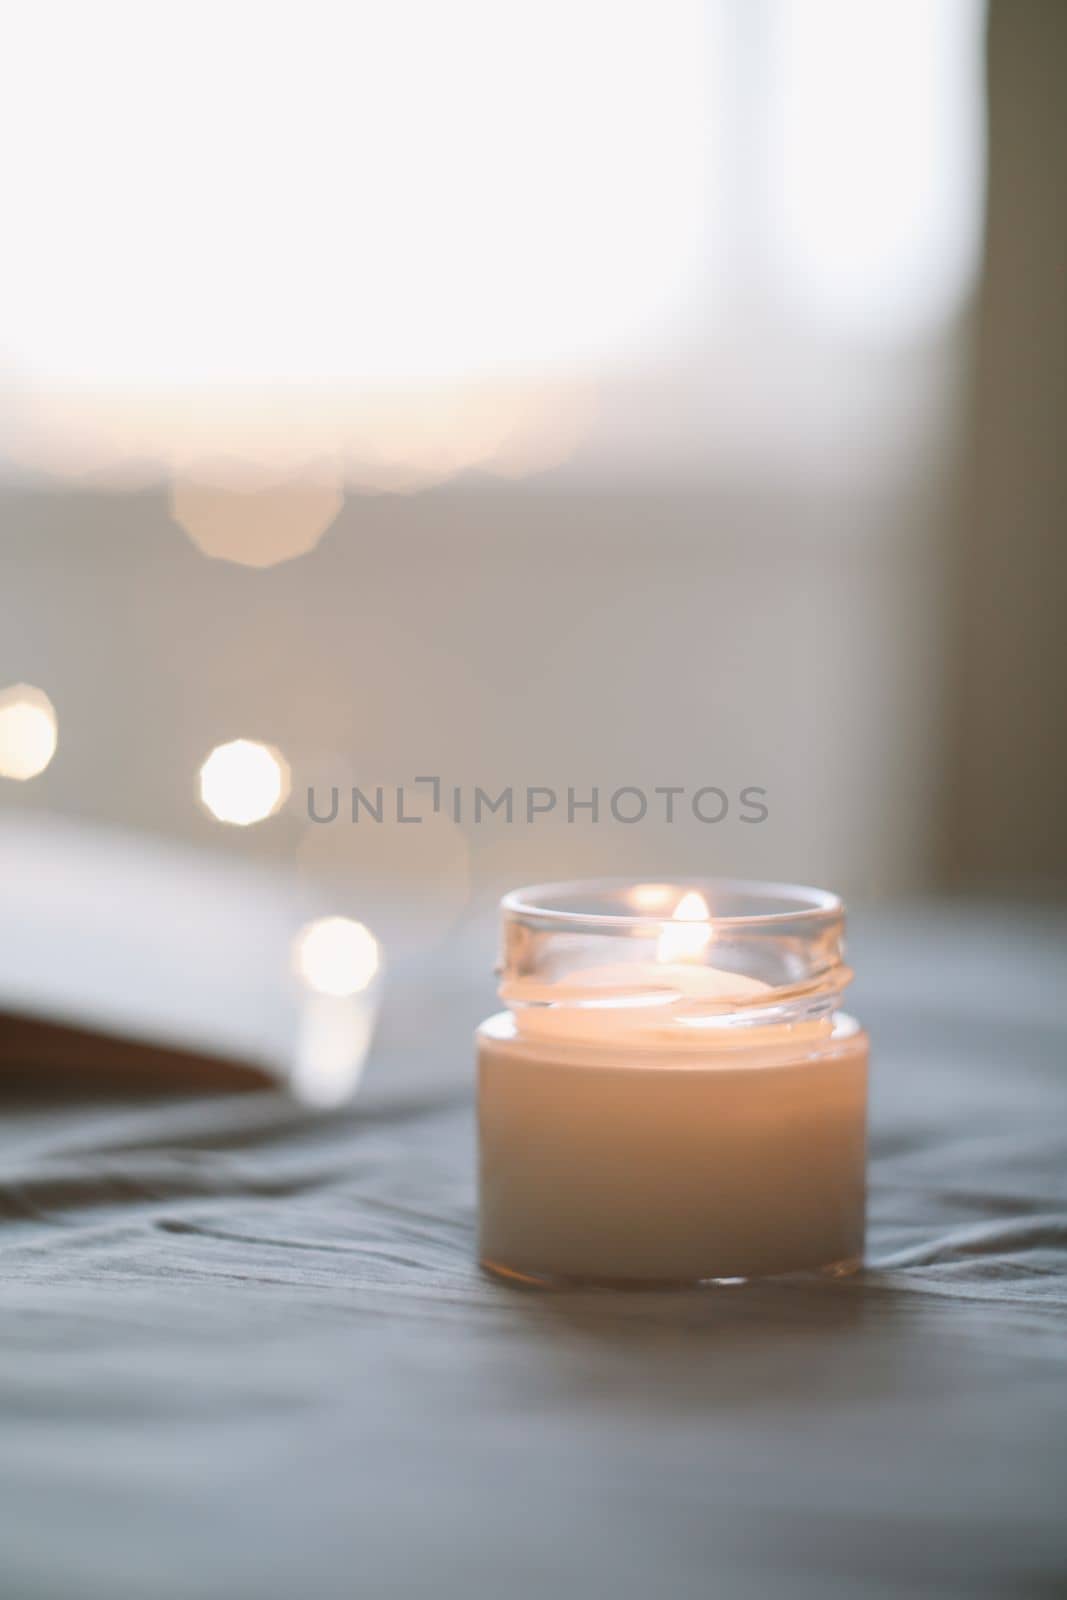 Burning candle in bed close up over lights. Cozy still life composition. home decor